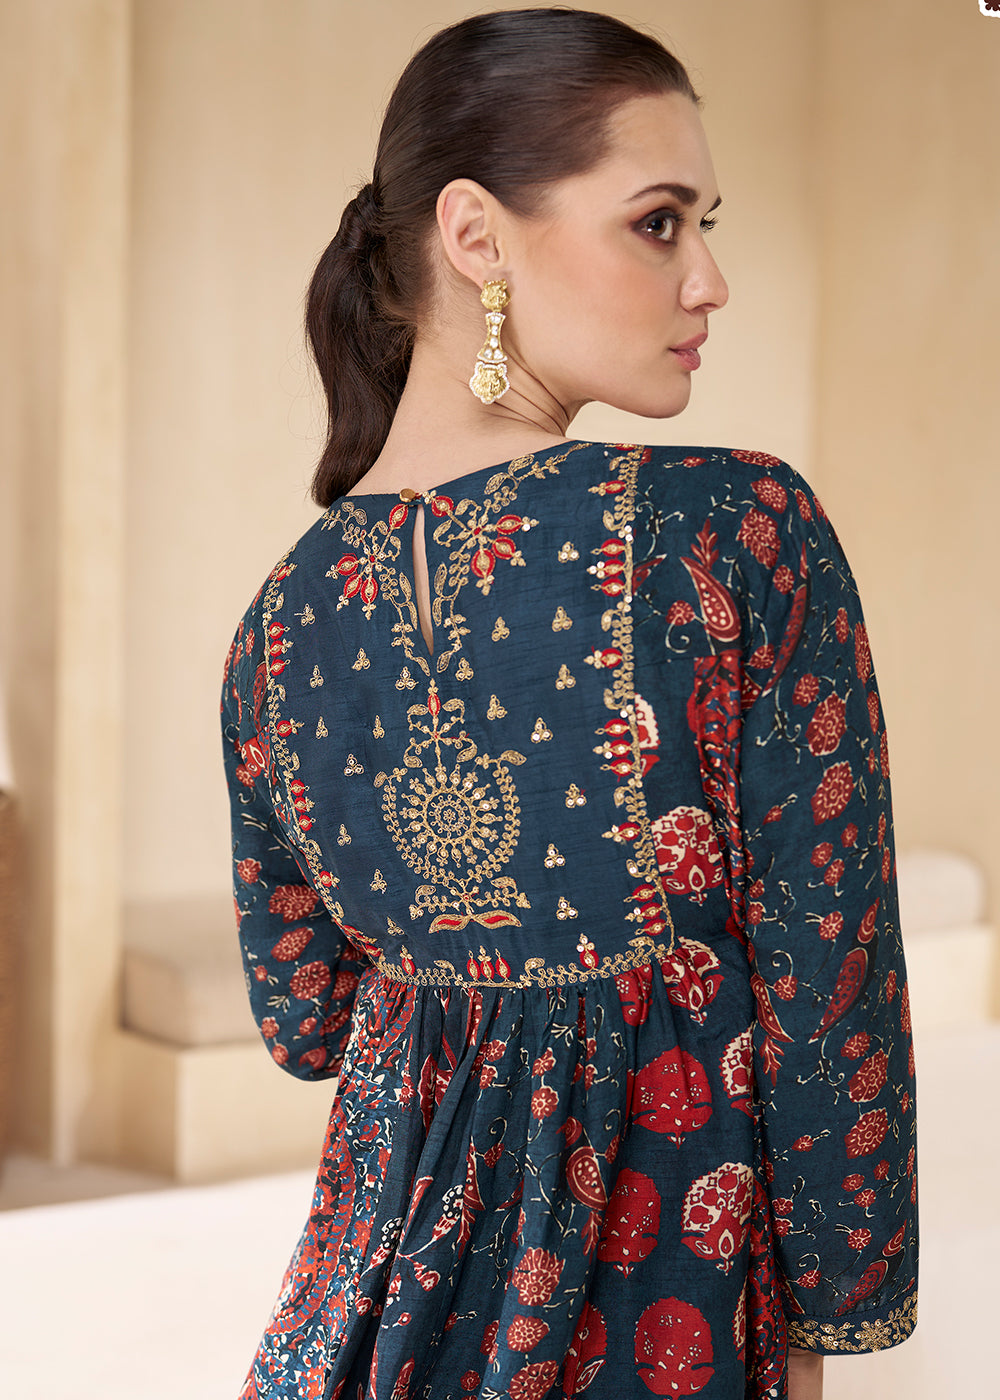 Shop Now Blue Digital Printed & Embroidered Party Style Sharara Suit Online at Empress Clothing in USA, UK, Canada, Italy & Worldwide.